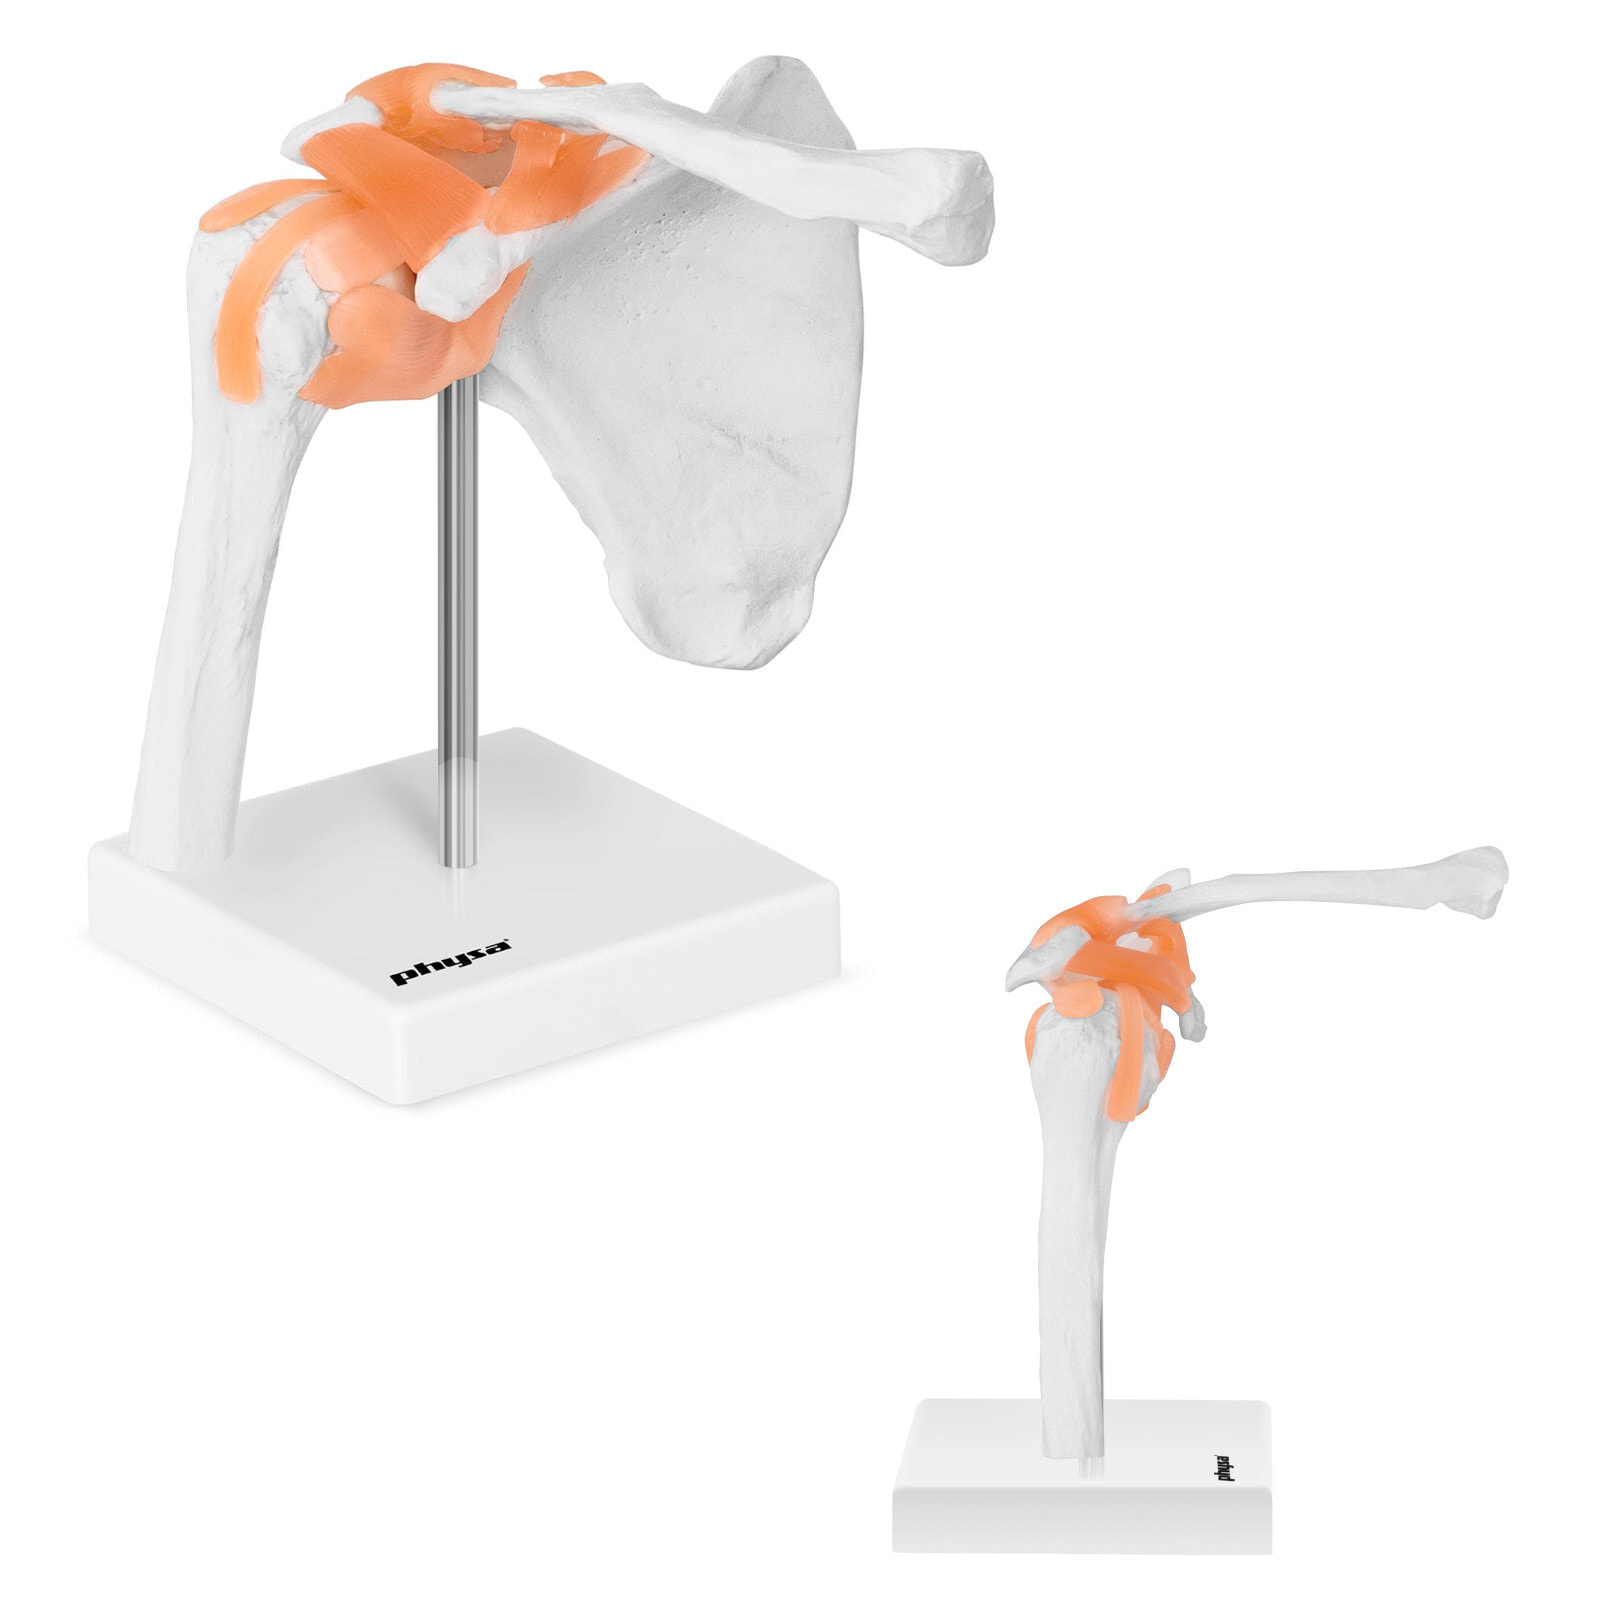 Anatomical model of the shoulder joint in a 1: 1 scale